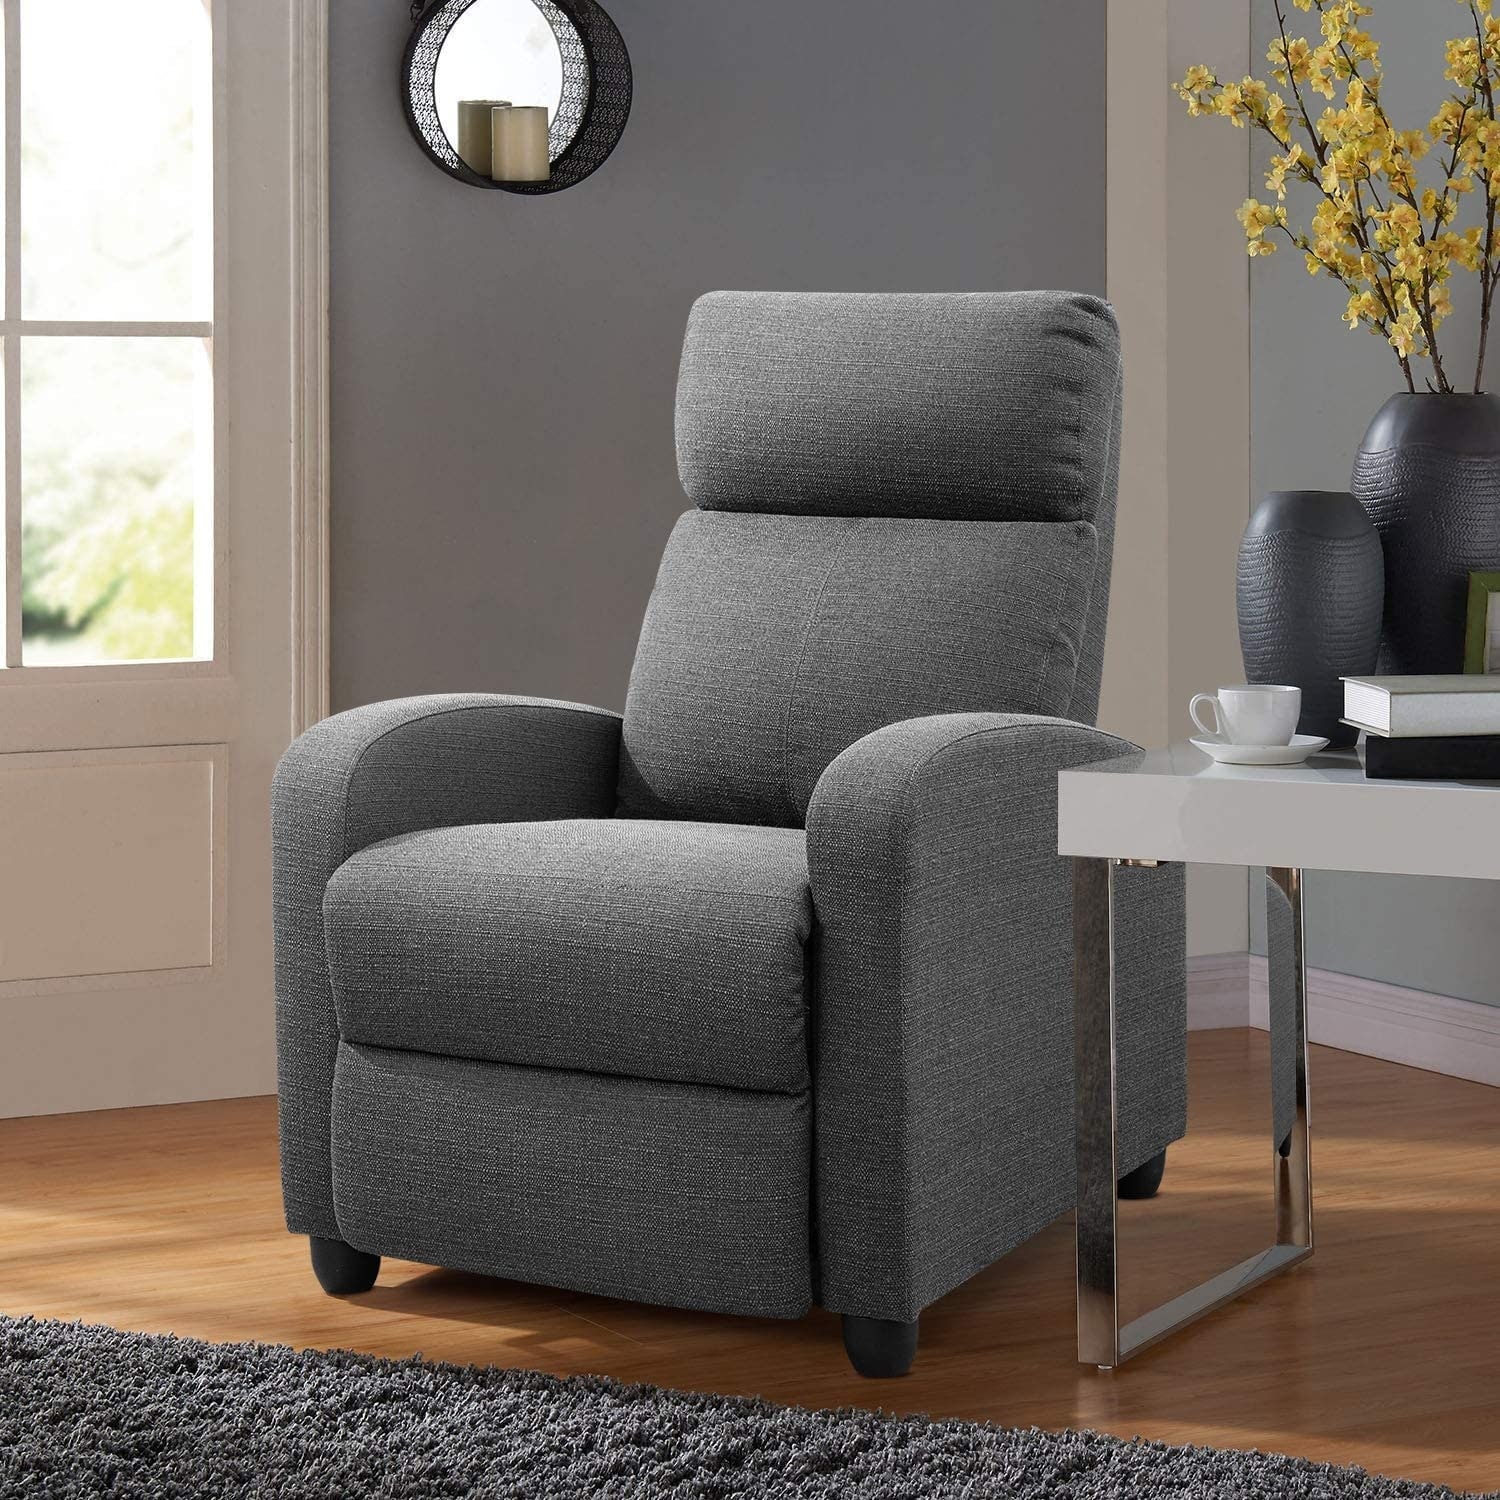 Modern Beige Fabric Recliner Sofa Living Room Home Theater Single Reclining Armchair with Adjustable Back and Padded Cushion for Living Room and Bedro